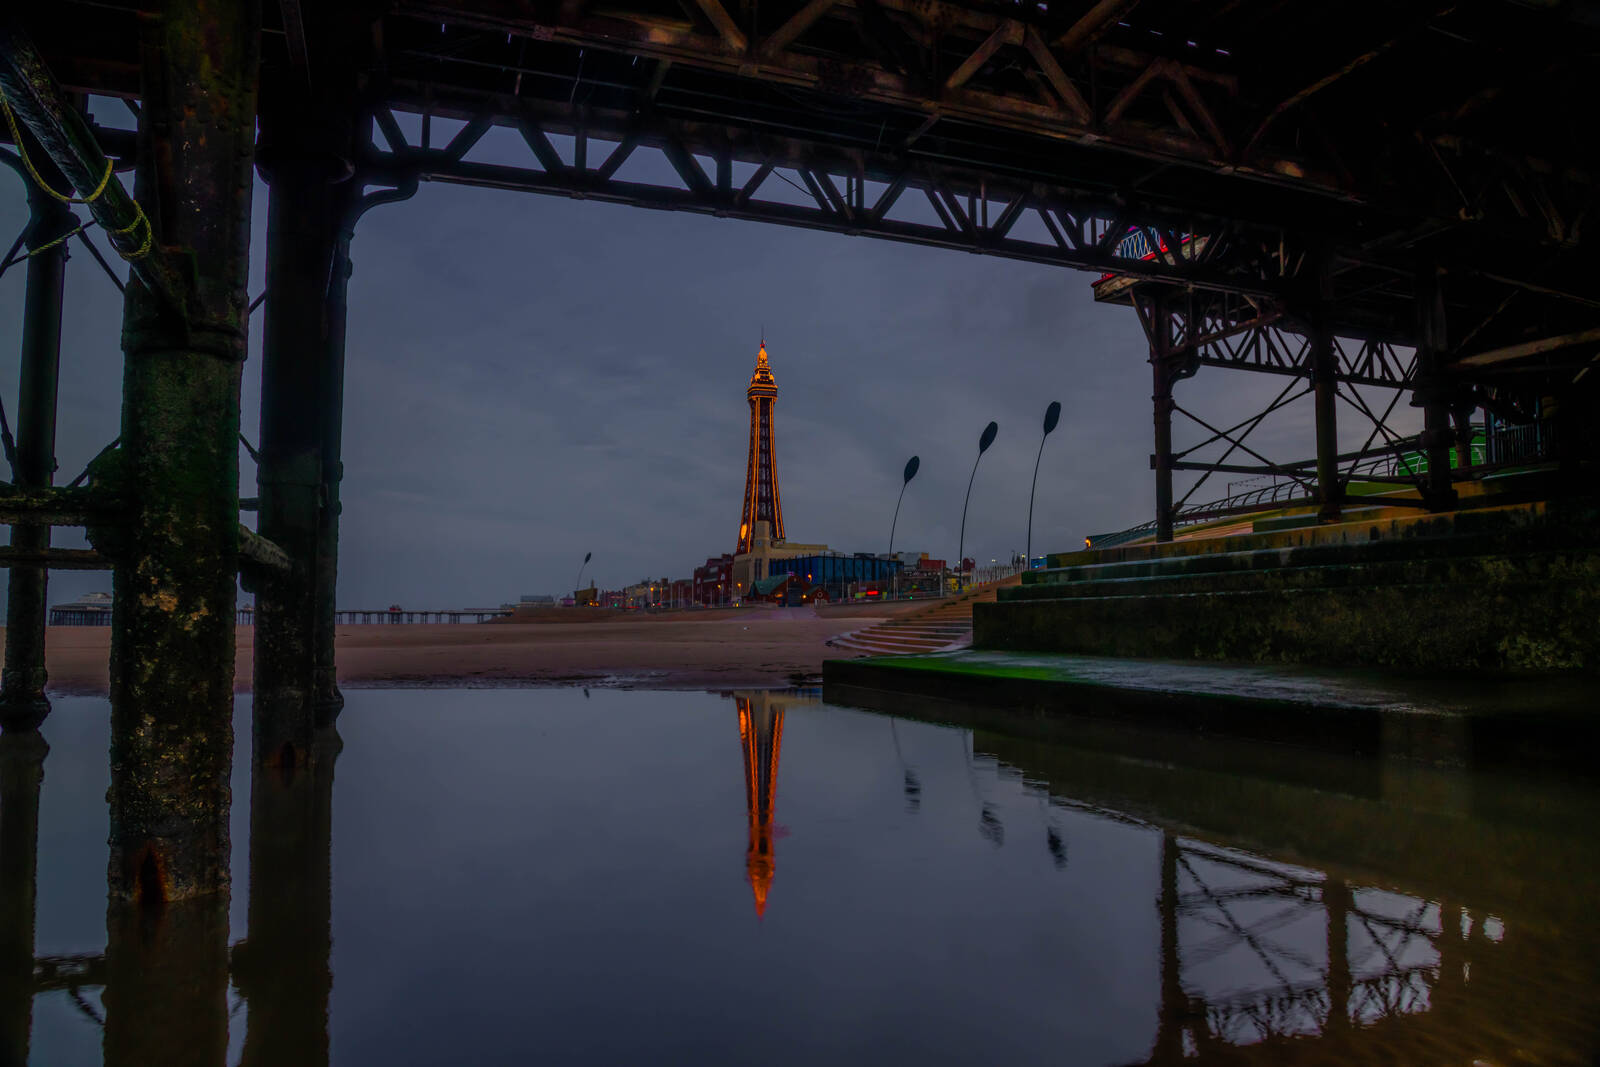 Image of Views of Blackpool Tower by michael bennett